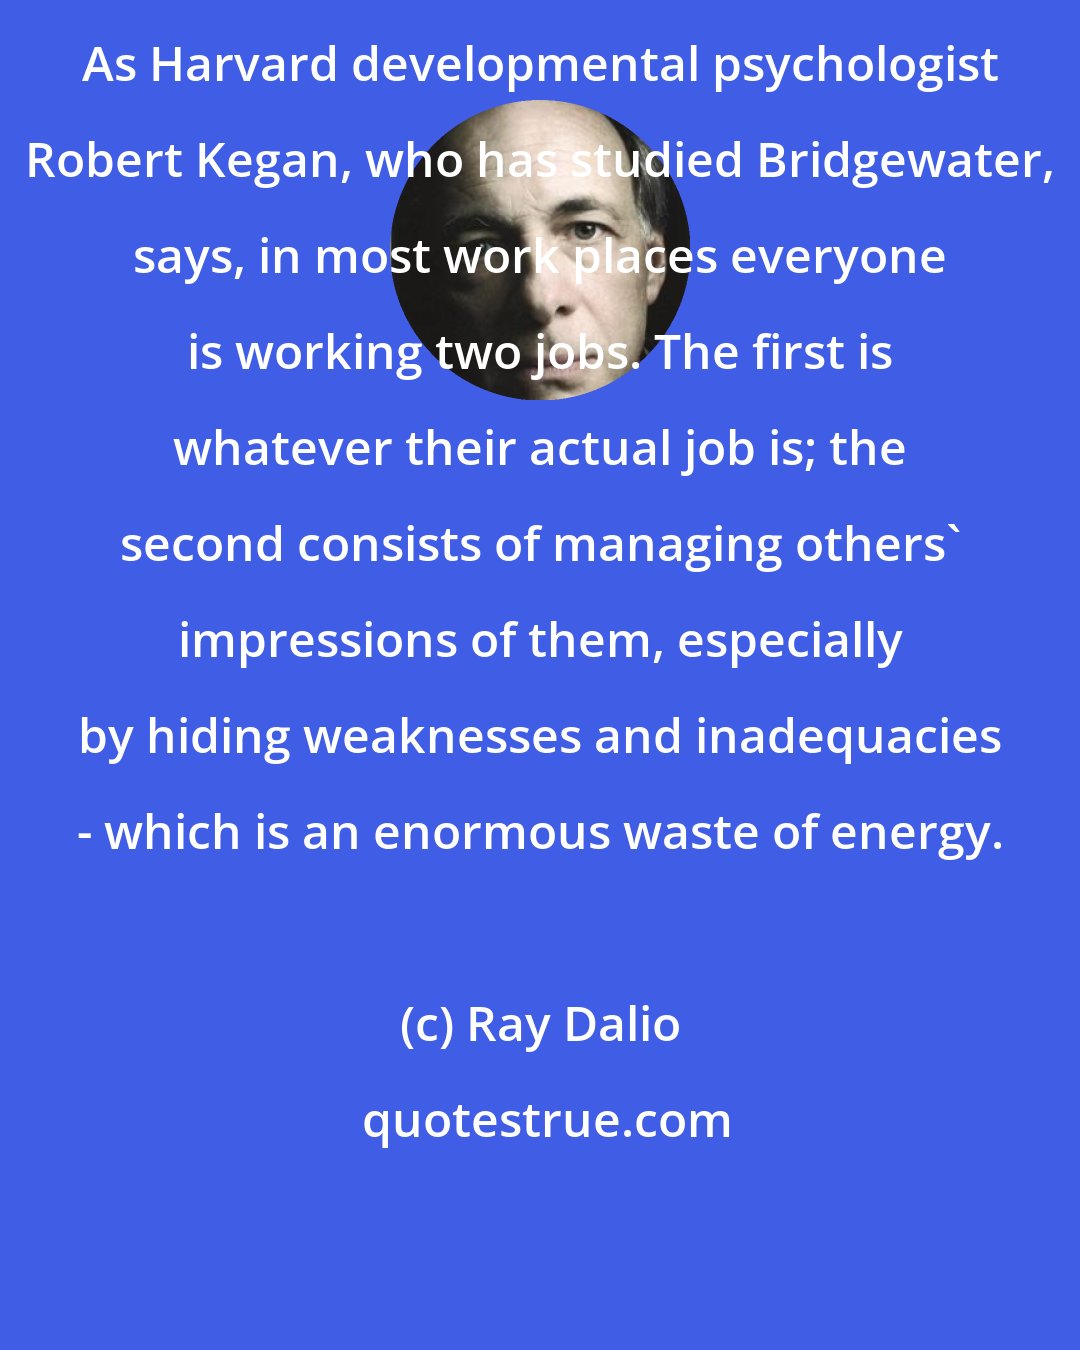 Ray Dalio: As Harvard developmental psychologist Robert Kegan, who has studied Bridgewater, says, in most work places everyone is working two jobs. The first is whatever their actual job is; the second consists of managing others' impressions of them, especially by hiding weaknesses and inadequacies - which is an enormous waste of energy.